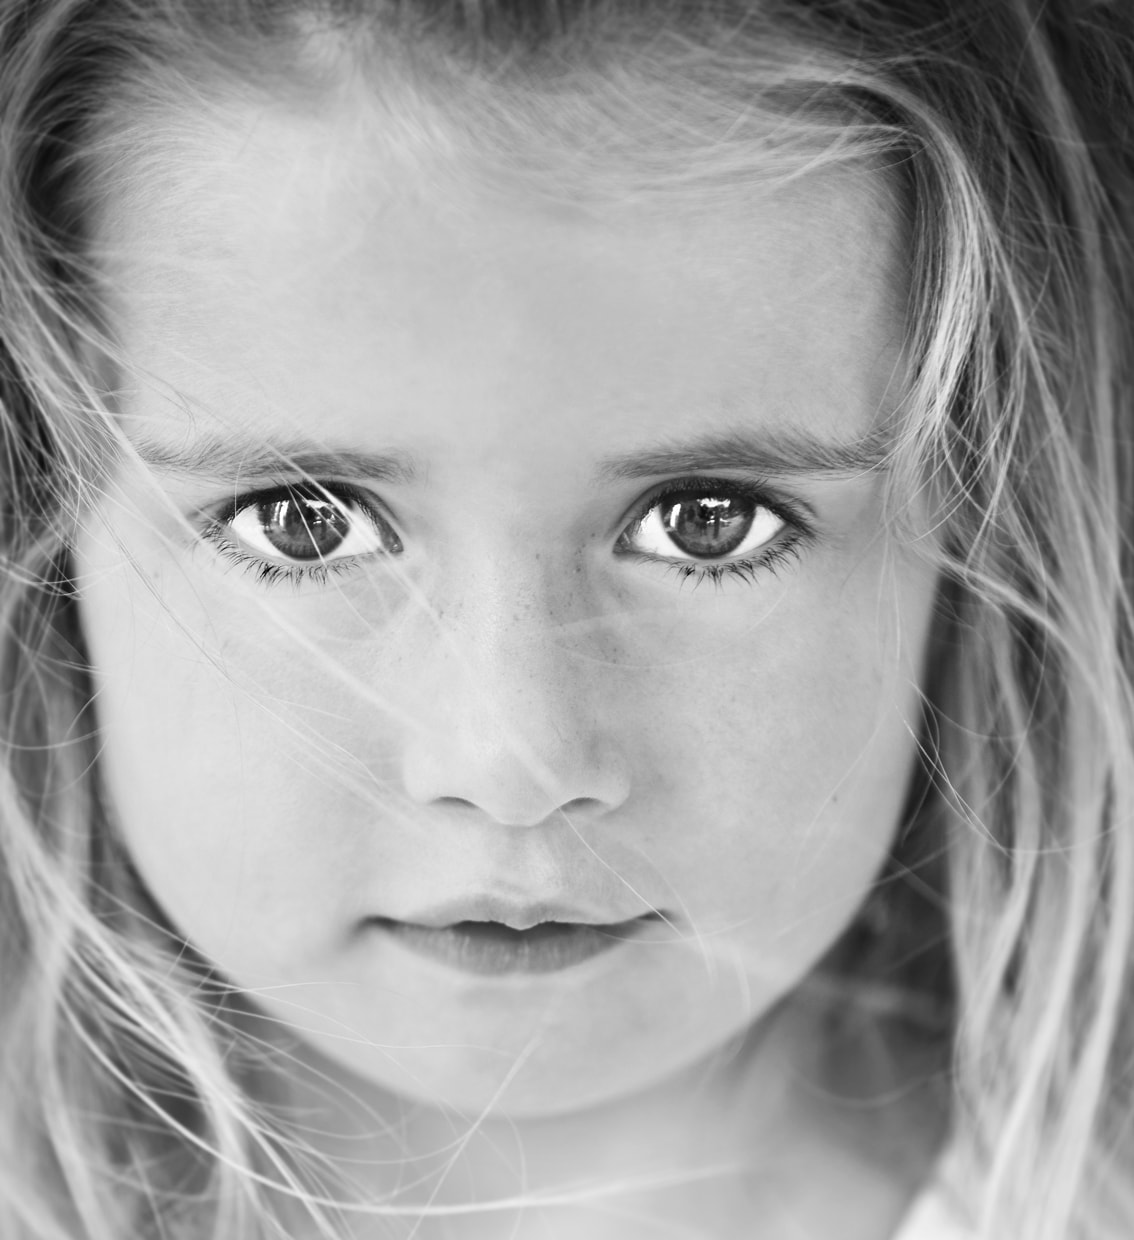 Photography marbella, Portraits, Portrait Photography Marbella, Eyes with a soul, look into my eyes, see my soul, Beauty, innocence, innocence of youth, black and white portraits Marbella, Family portraits Marbella